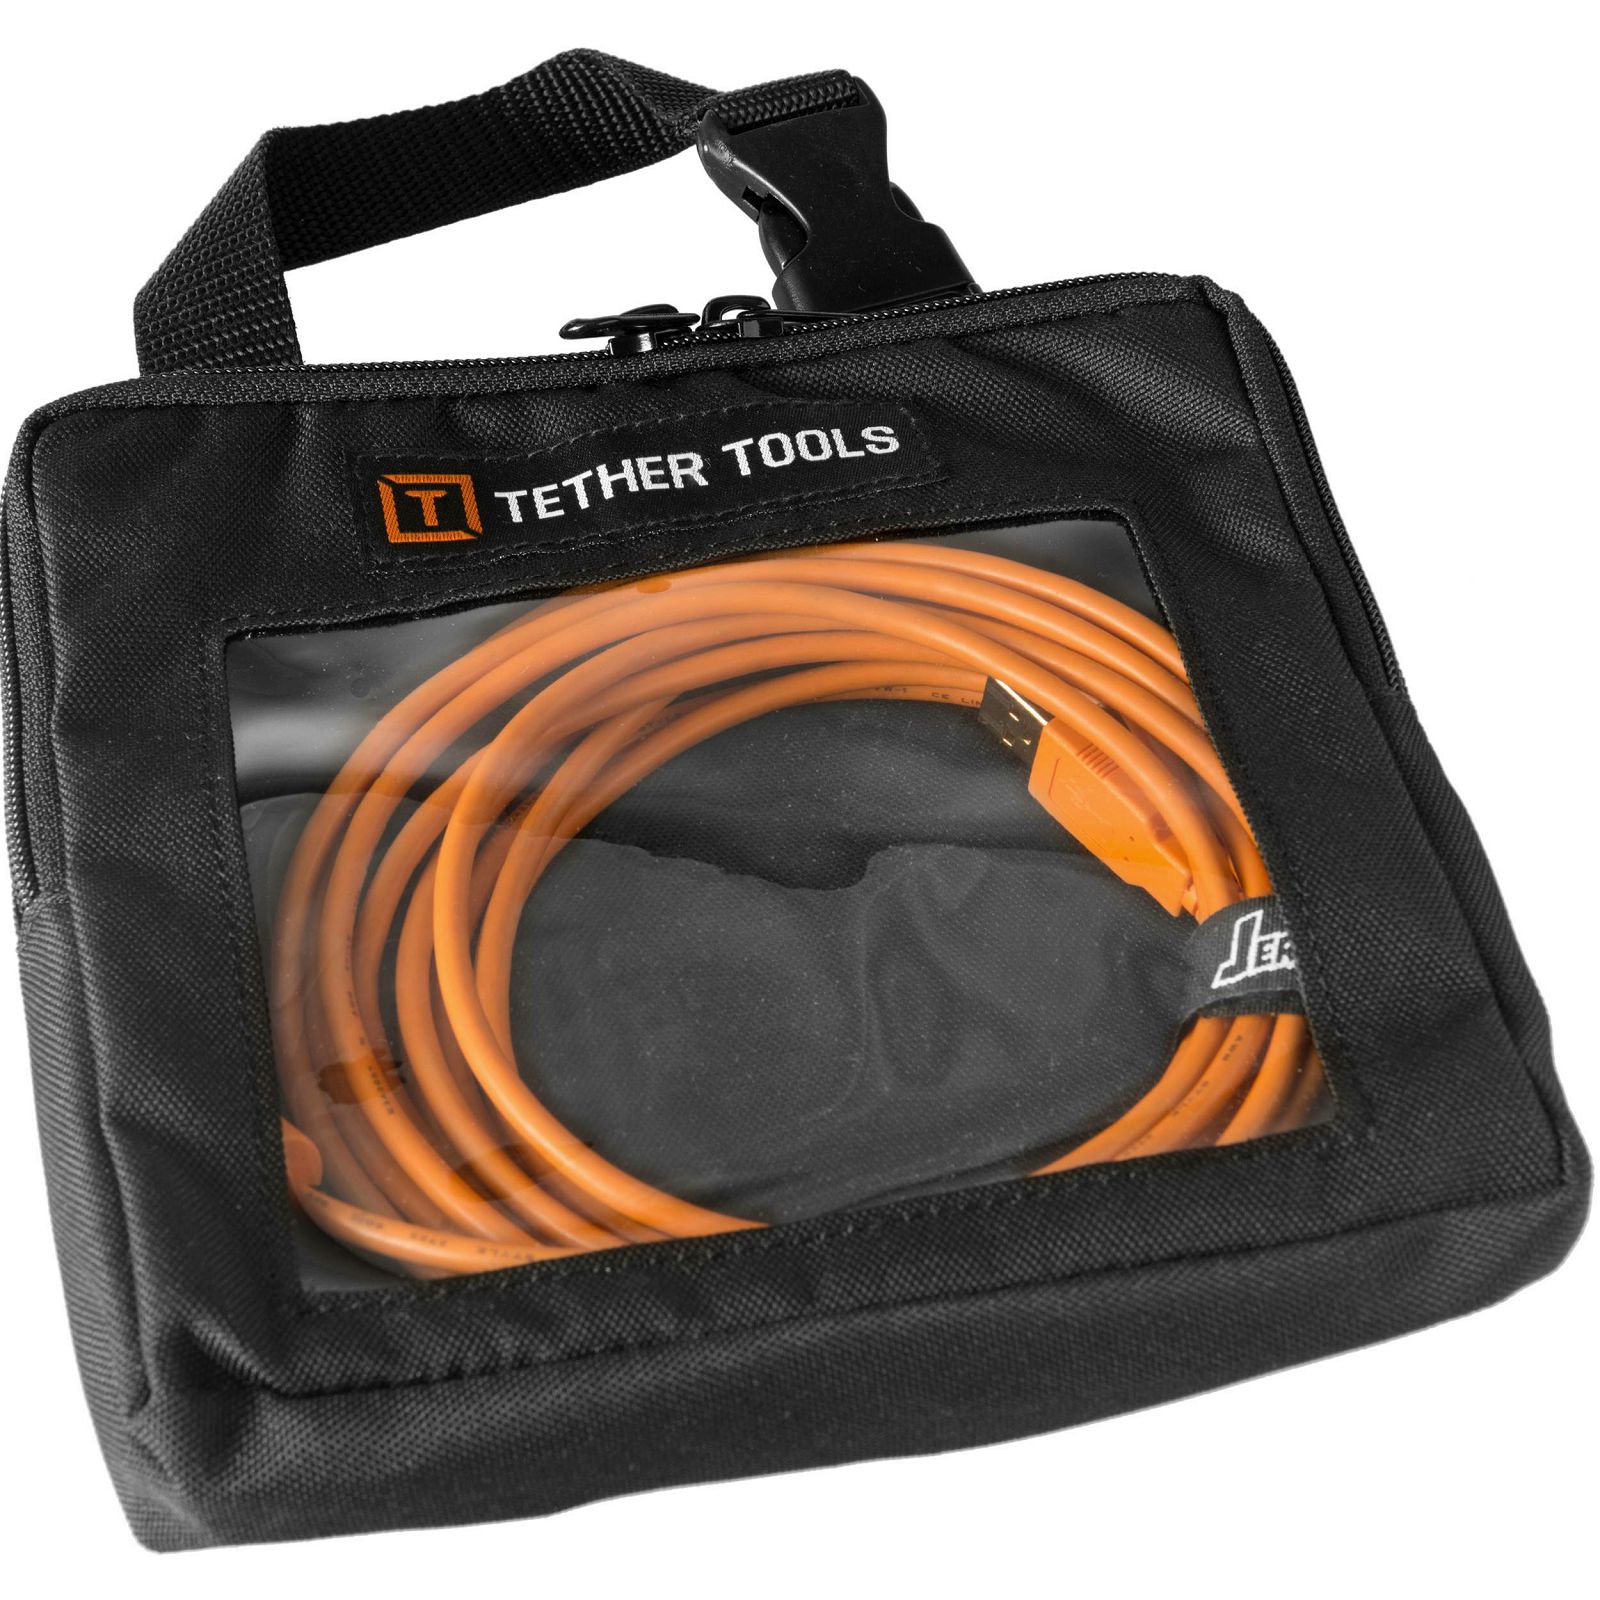 Tether tools